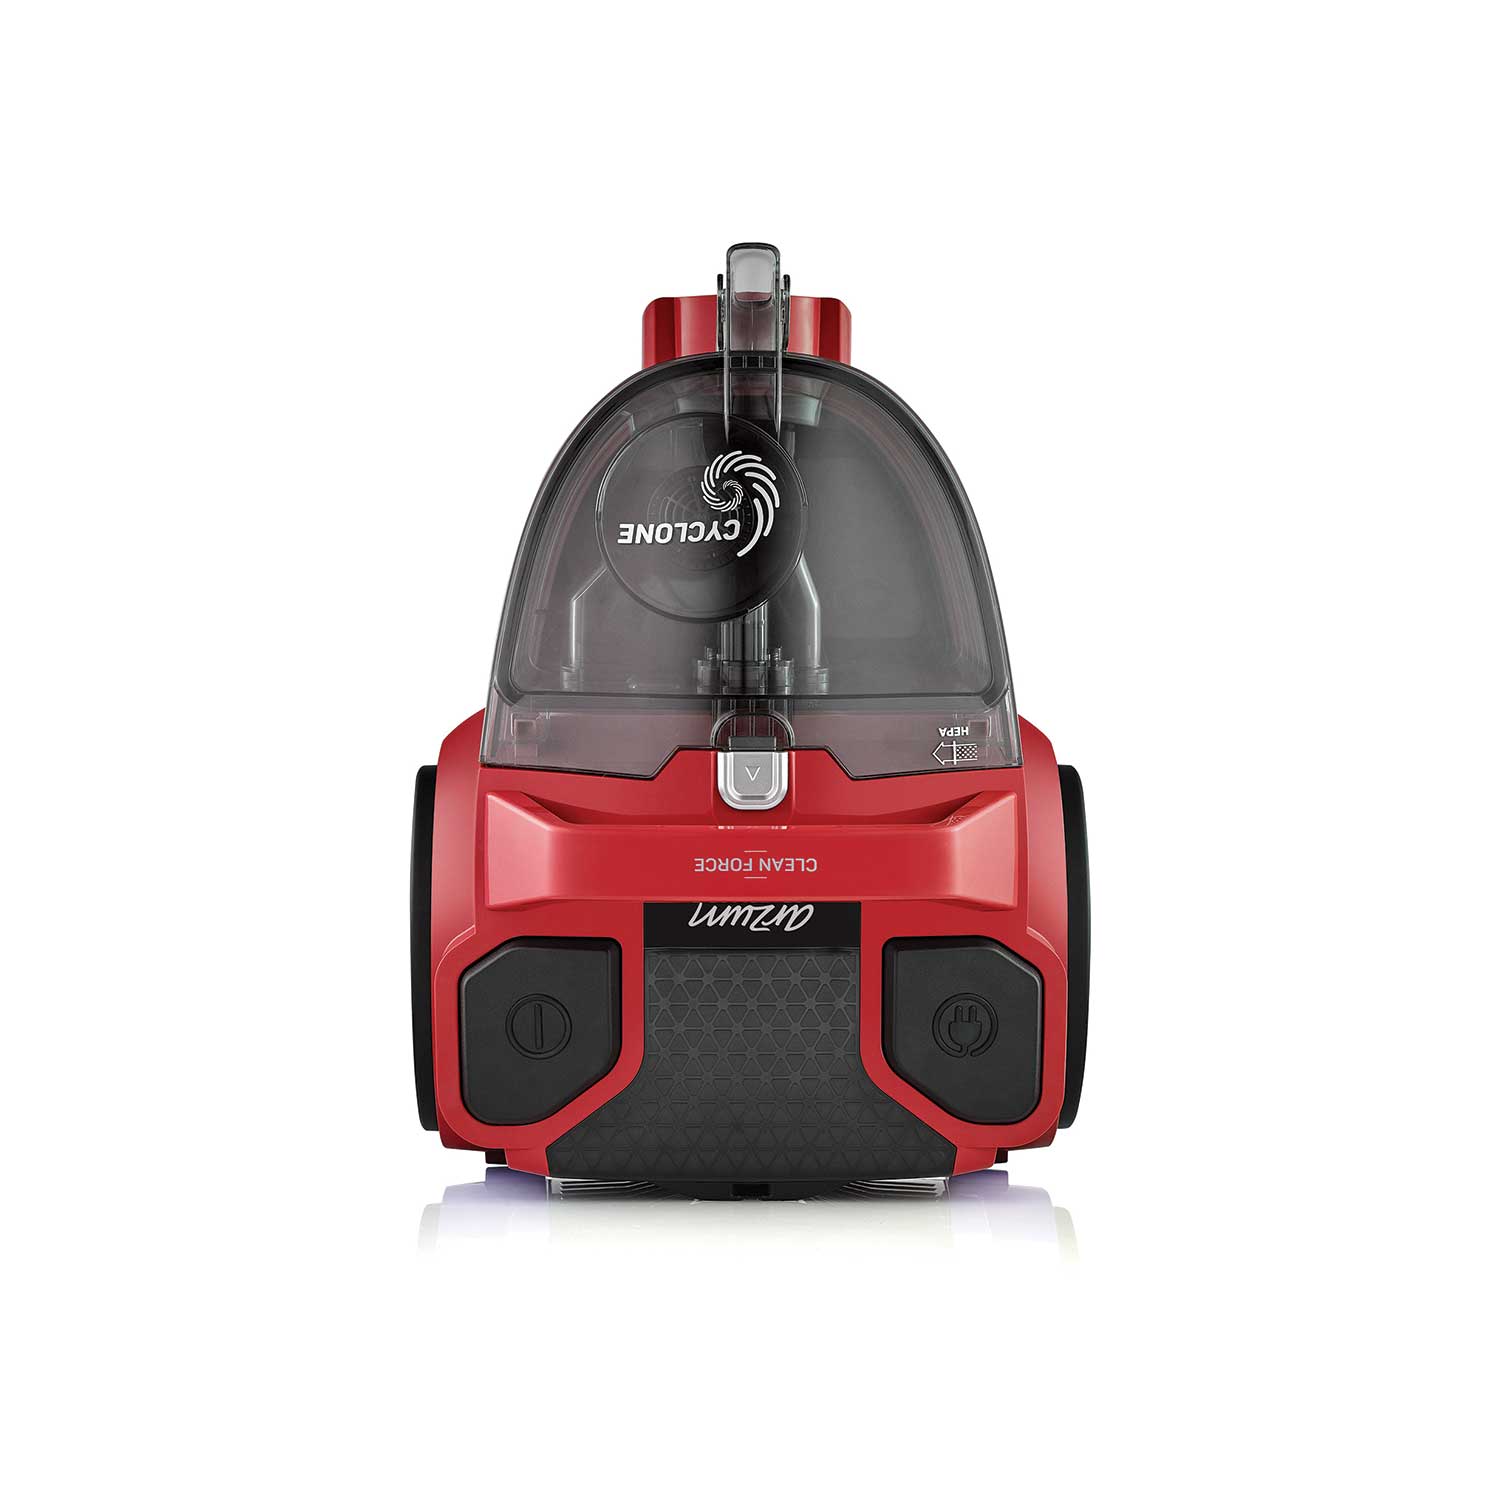 AR4071 Clean Force Red Cyclone Filter Vacuum Cleaner - Red - 6